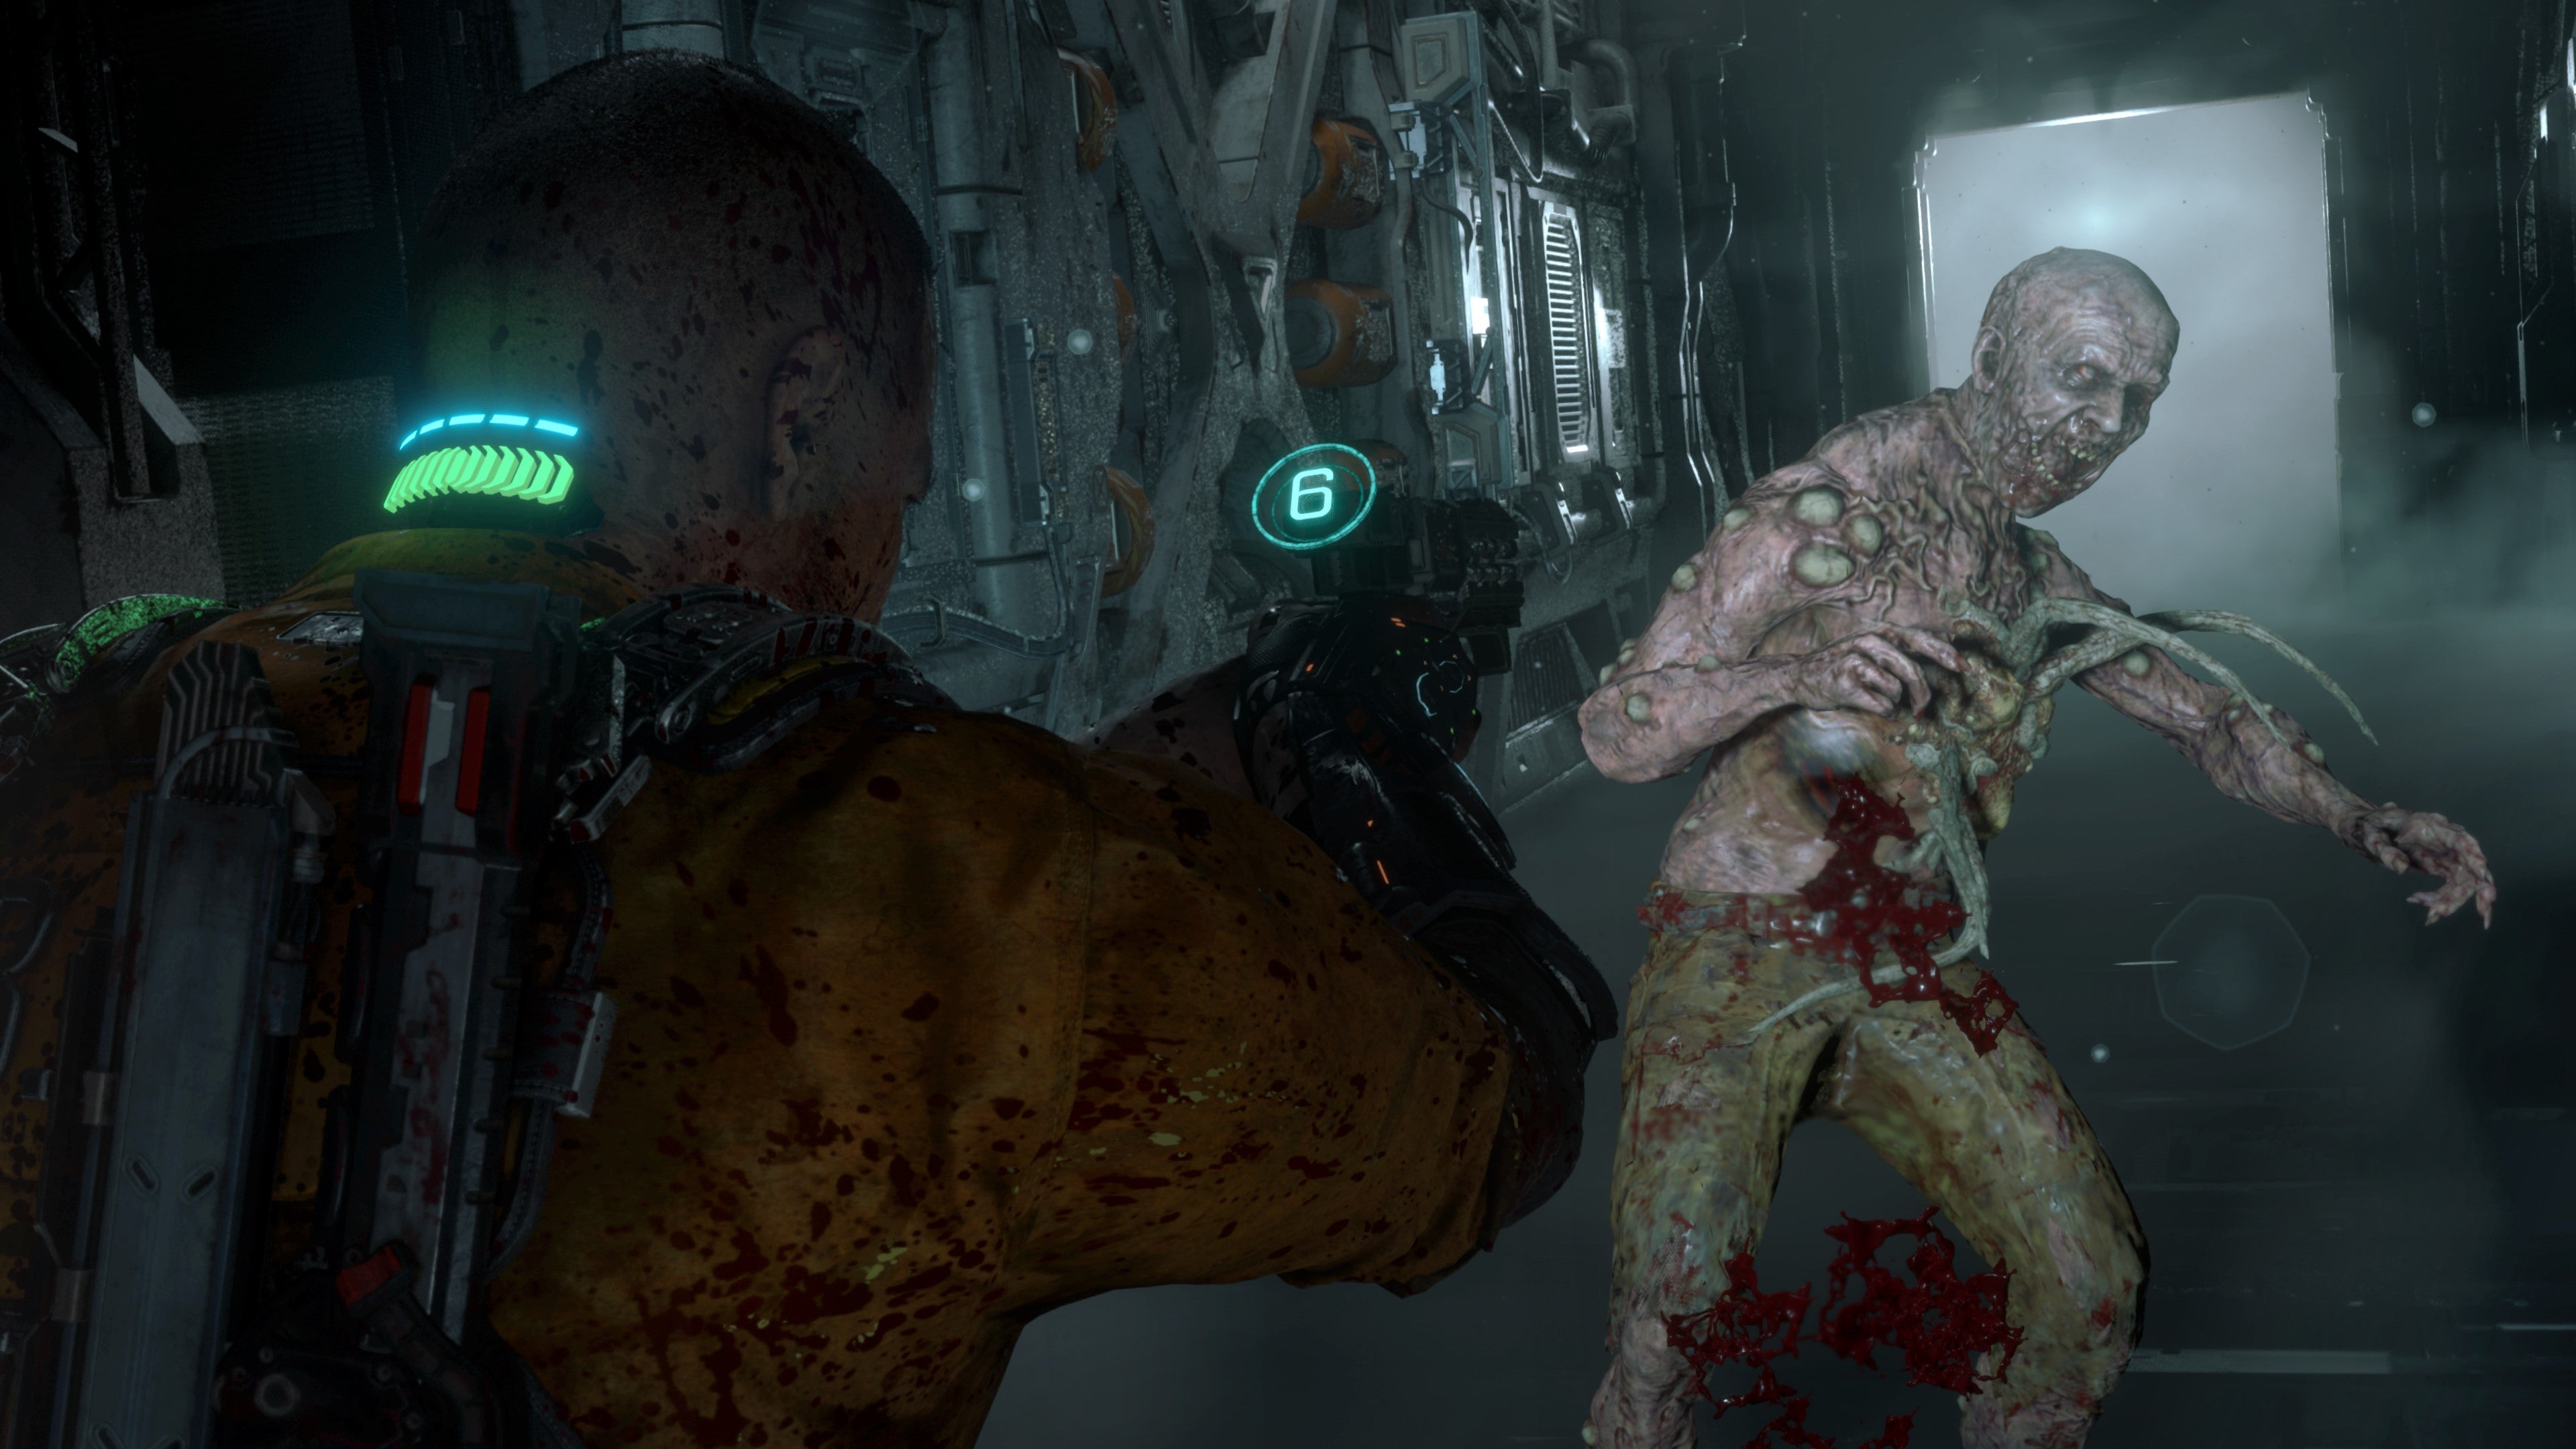 Jacob raises his pistol at a biophage with tentacles pouring out of its stomach in The Callisto Protocol.